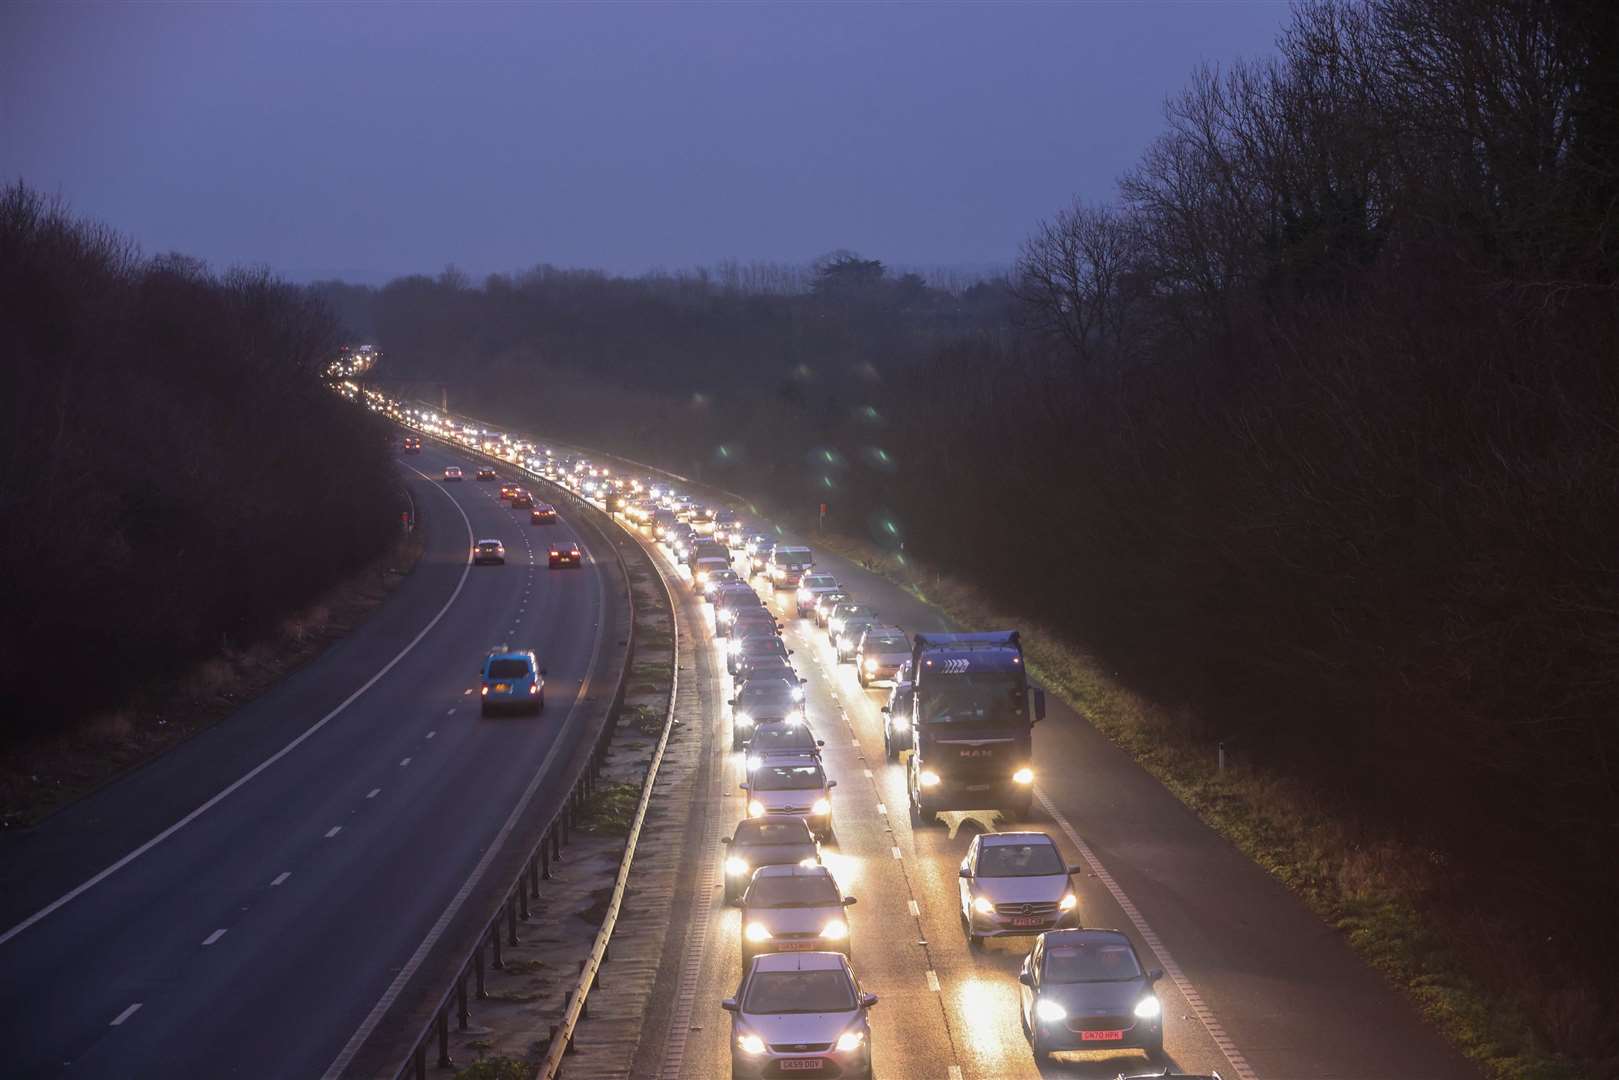 Huge queues on the M2 after a serious crash Pic: UKNIP